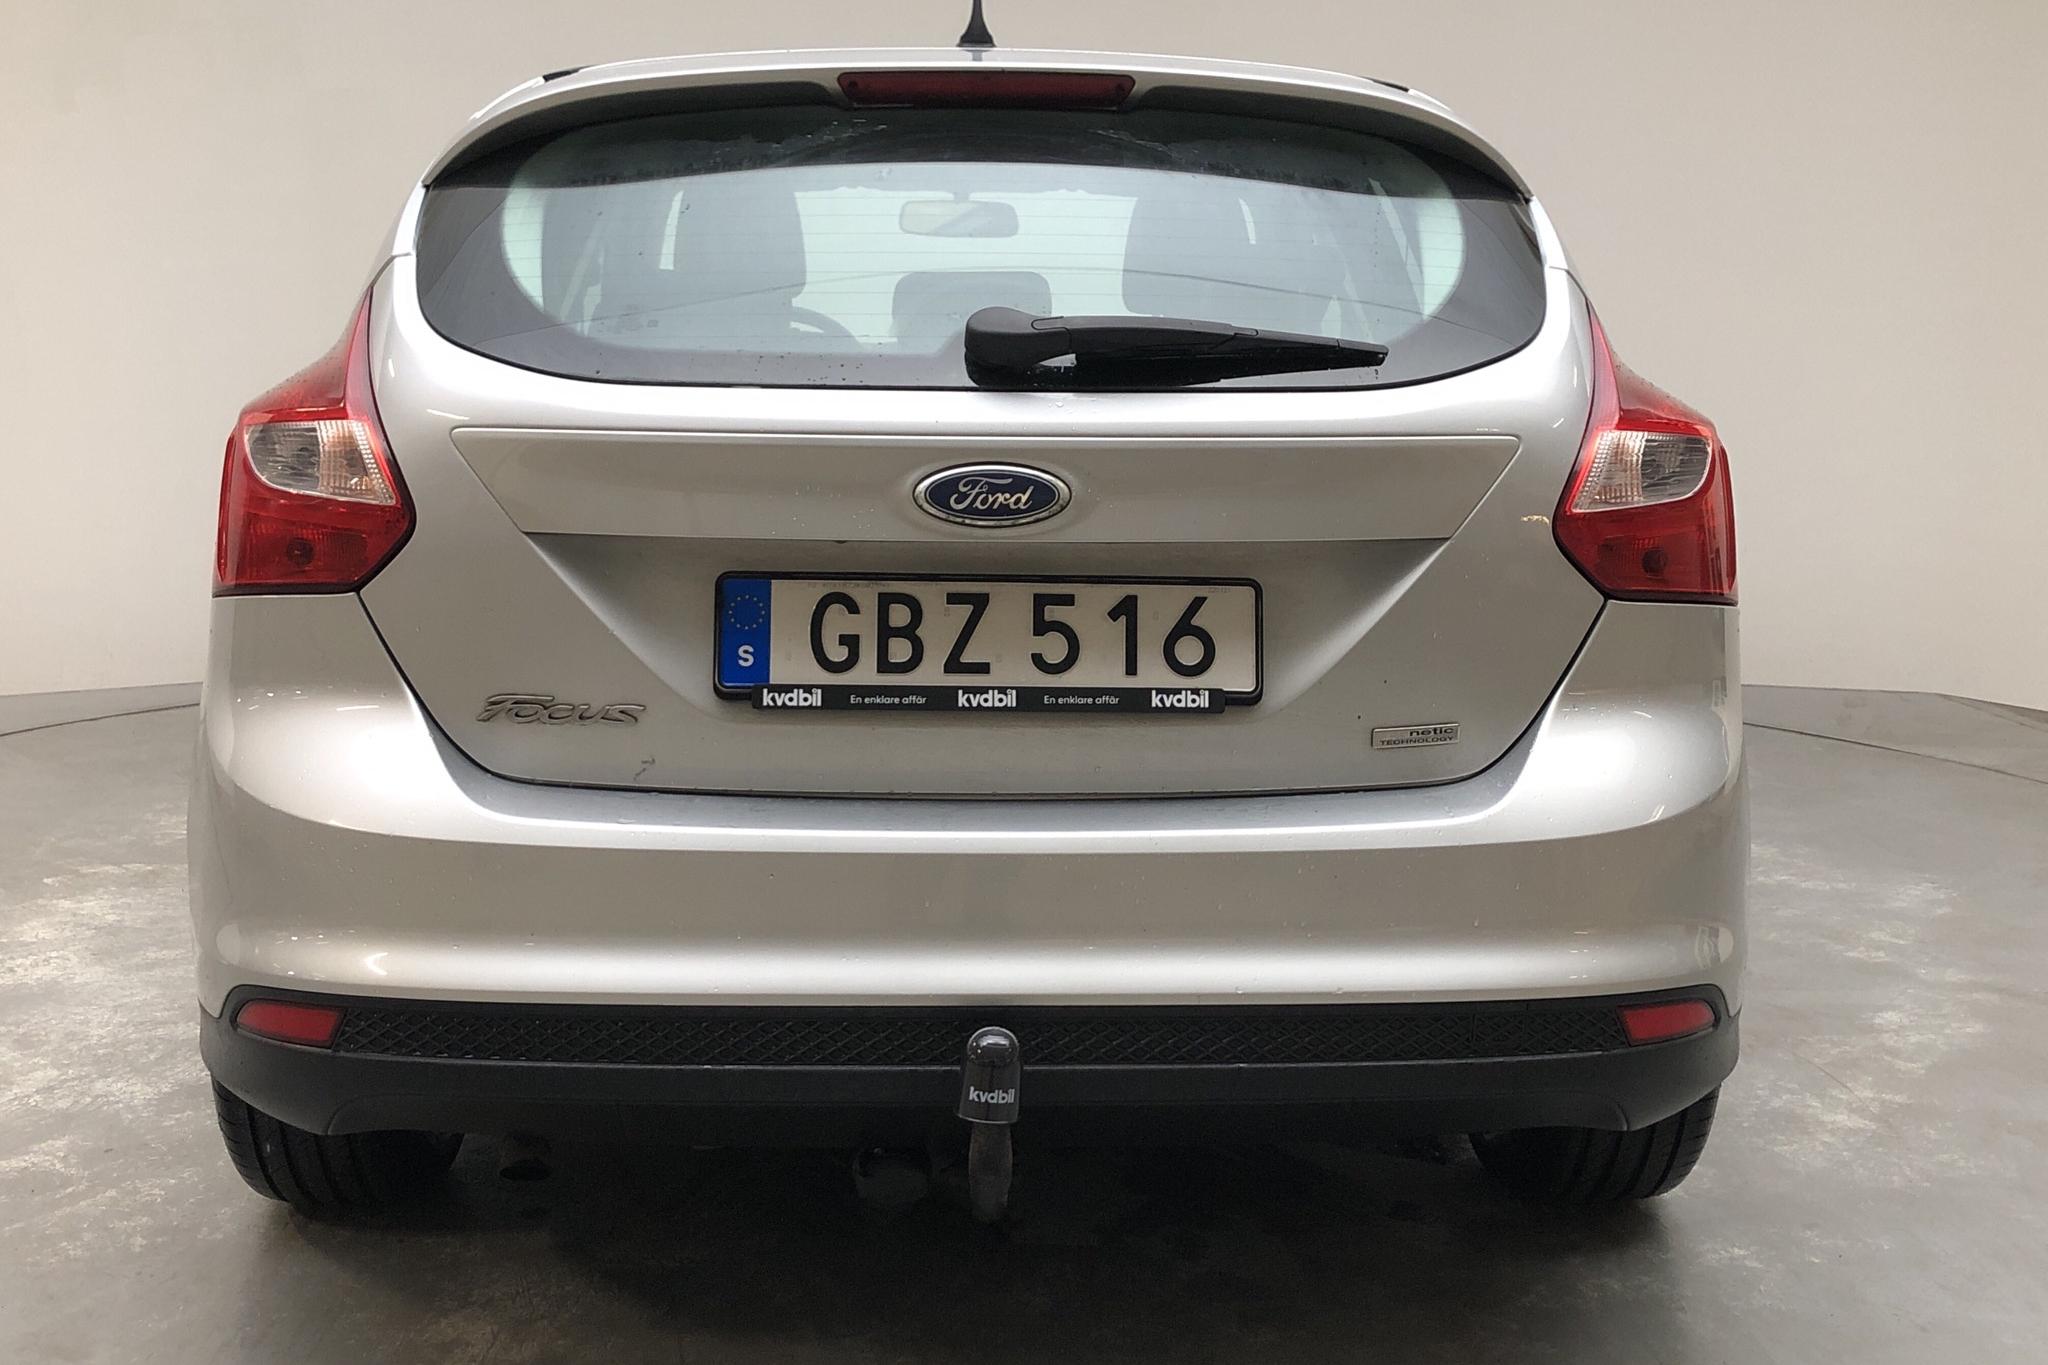 Ford Focus 1.0 EcoBoost 5dr (100hk) - 162 960 km - Manual - gray - 2013